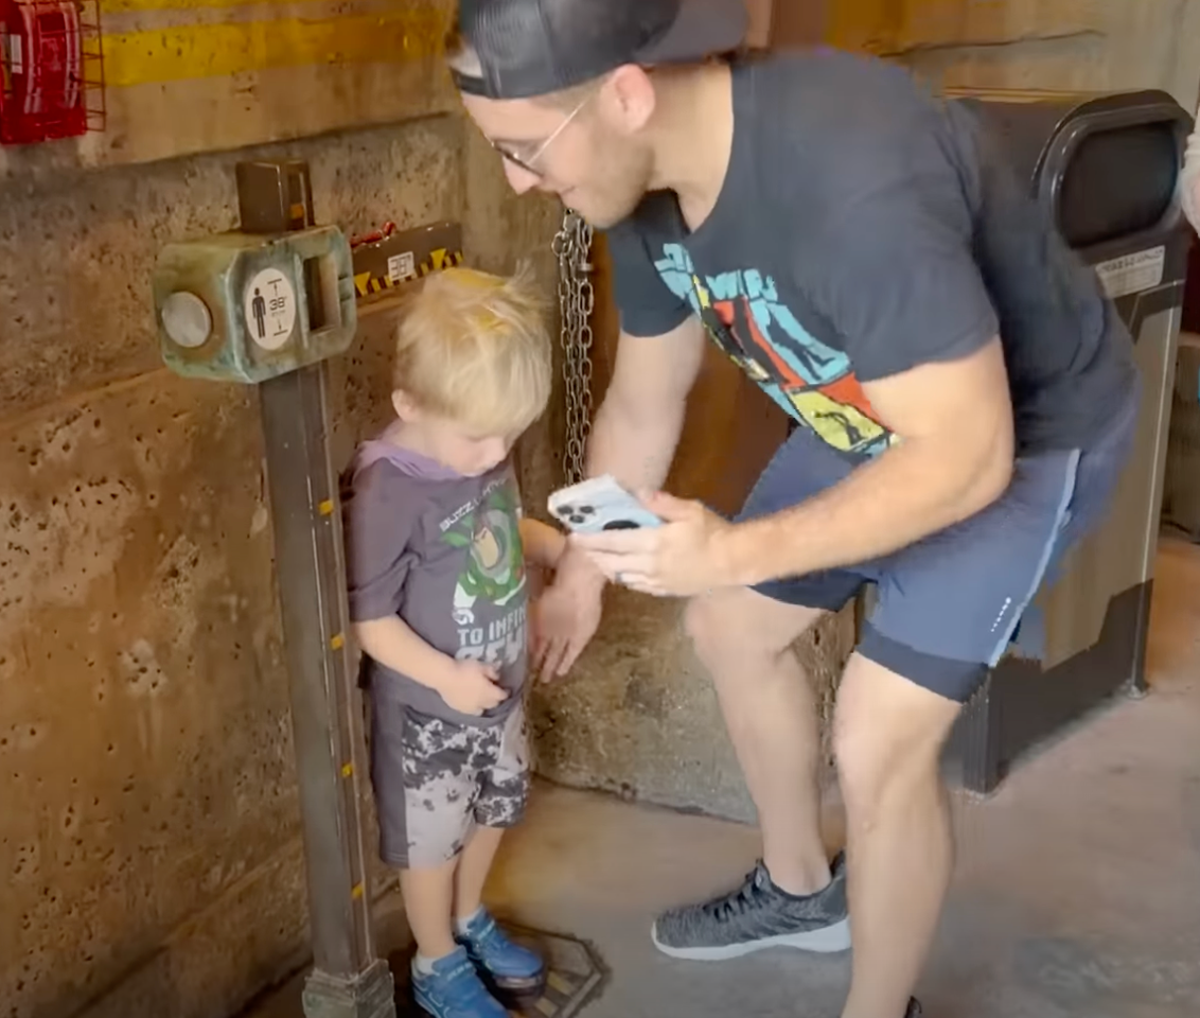 Dad criticised for ‘dangerous’ hack to get his son on Disney rides he’s too short for